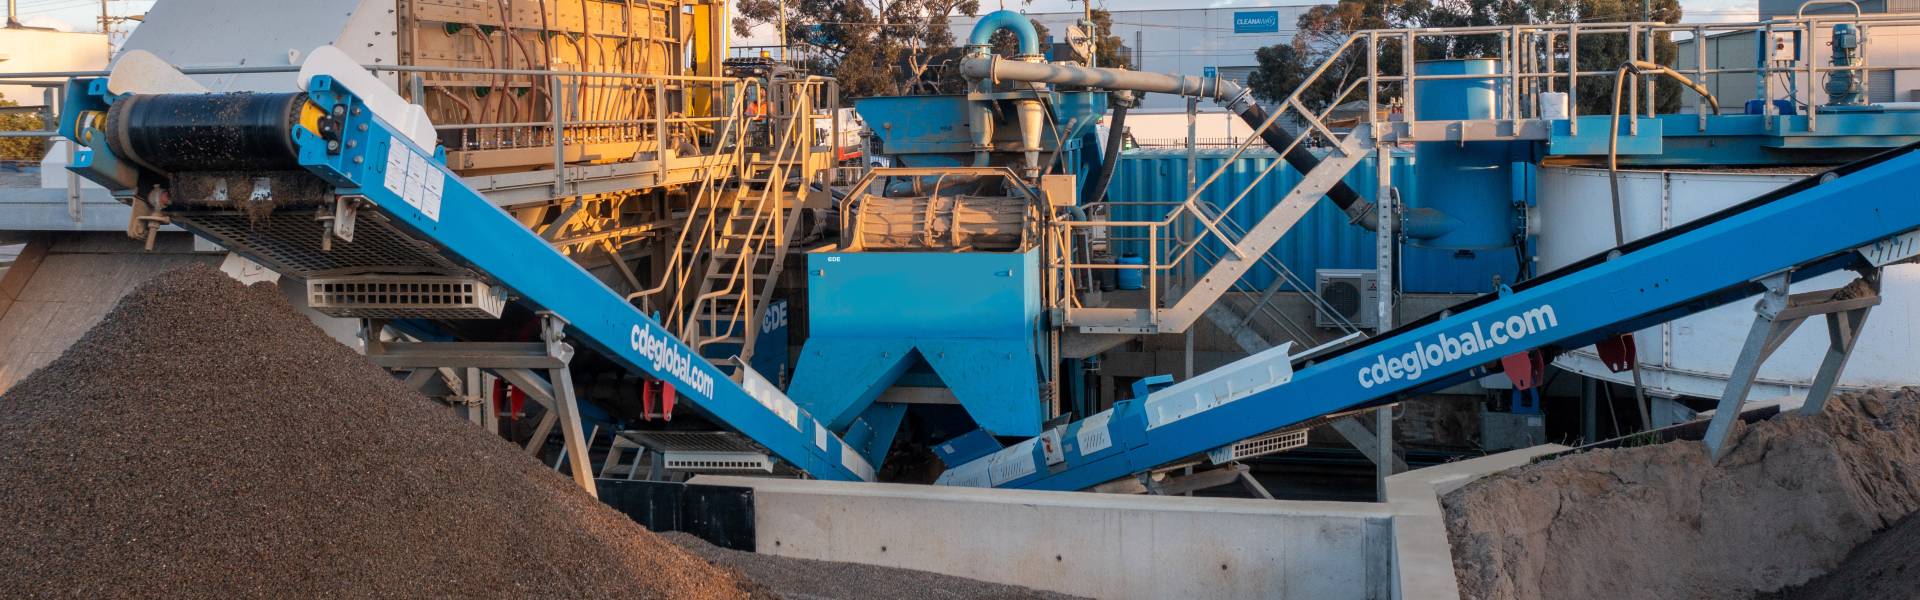 CDE To Showcase Solid/Liquid Waste Recycling Equipment At No-Dig Down Under